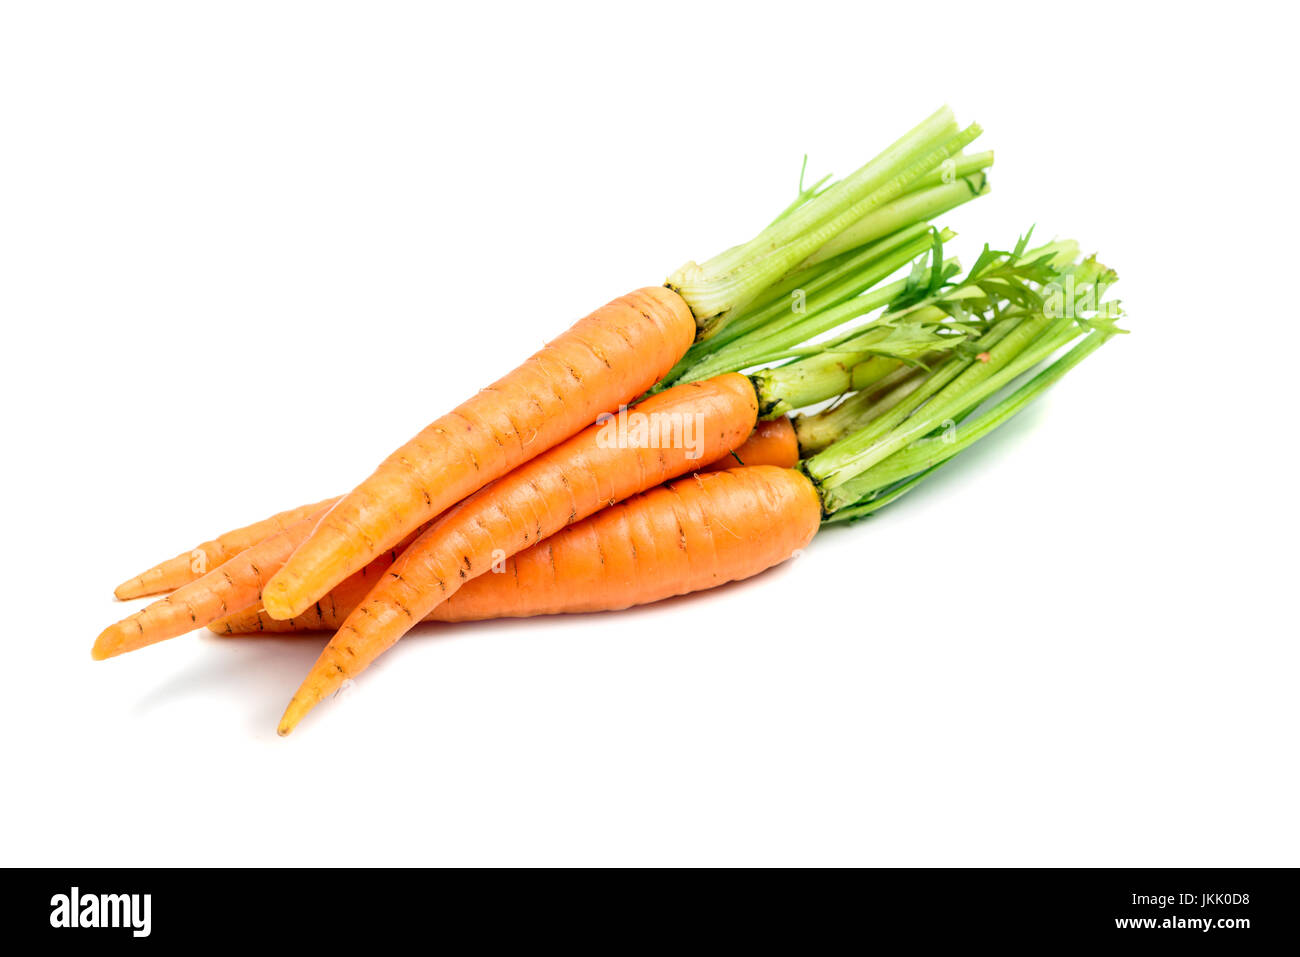 Heap of fresh carrots with stems isolated on white background Stock Photo